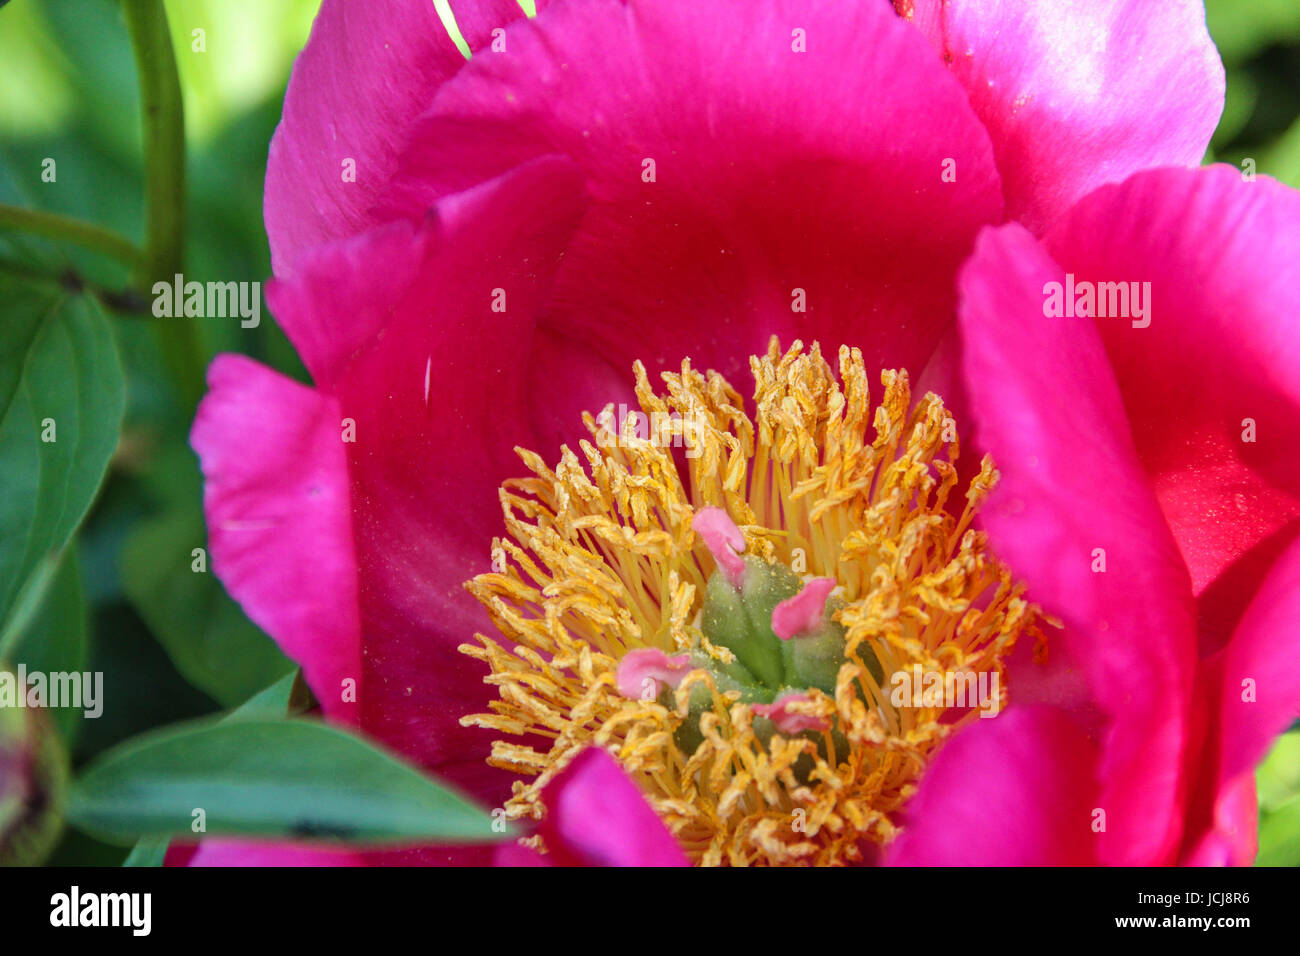 Close Up Pink Peony Flower Head with Pistil and Staminas, Peony Fest Stock Photo